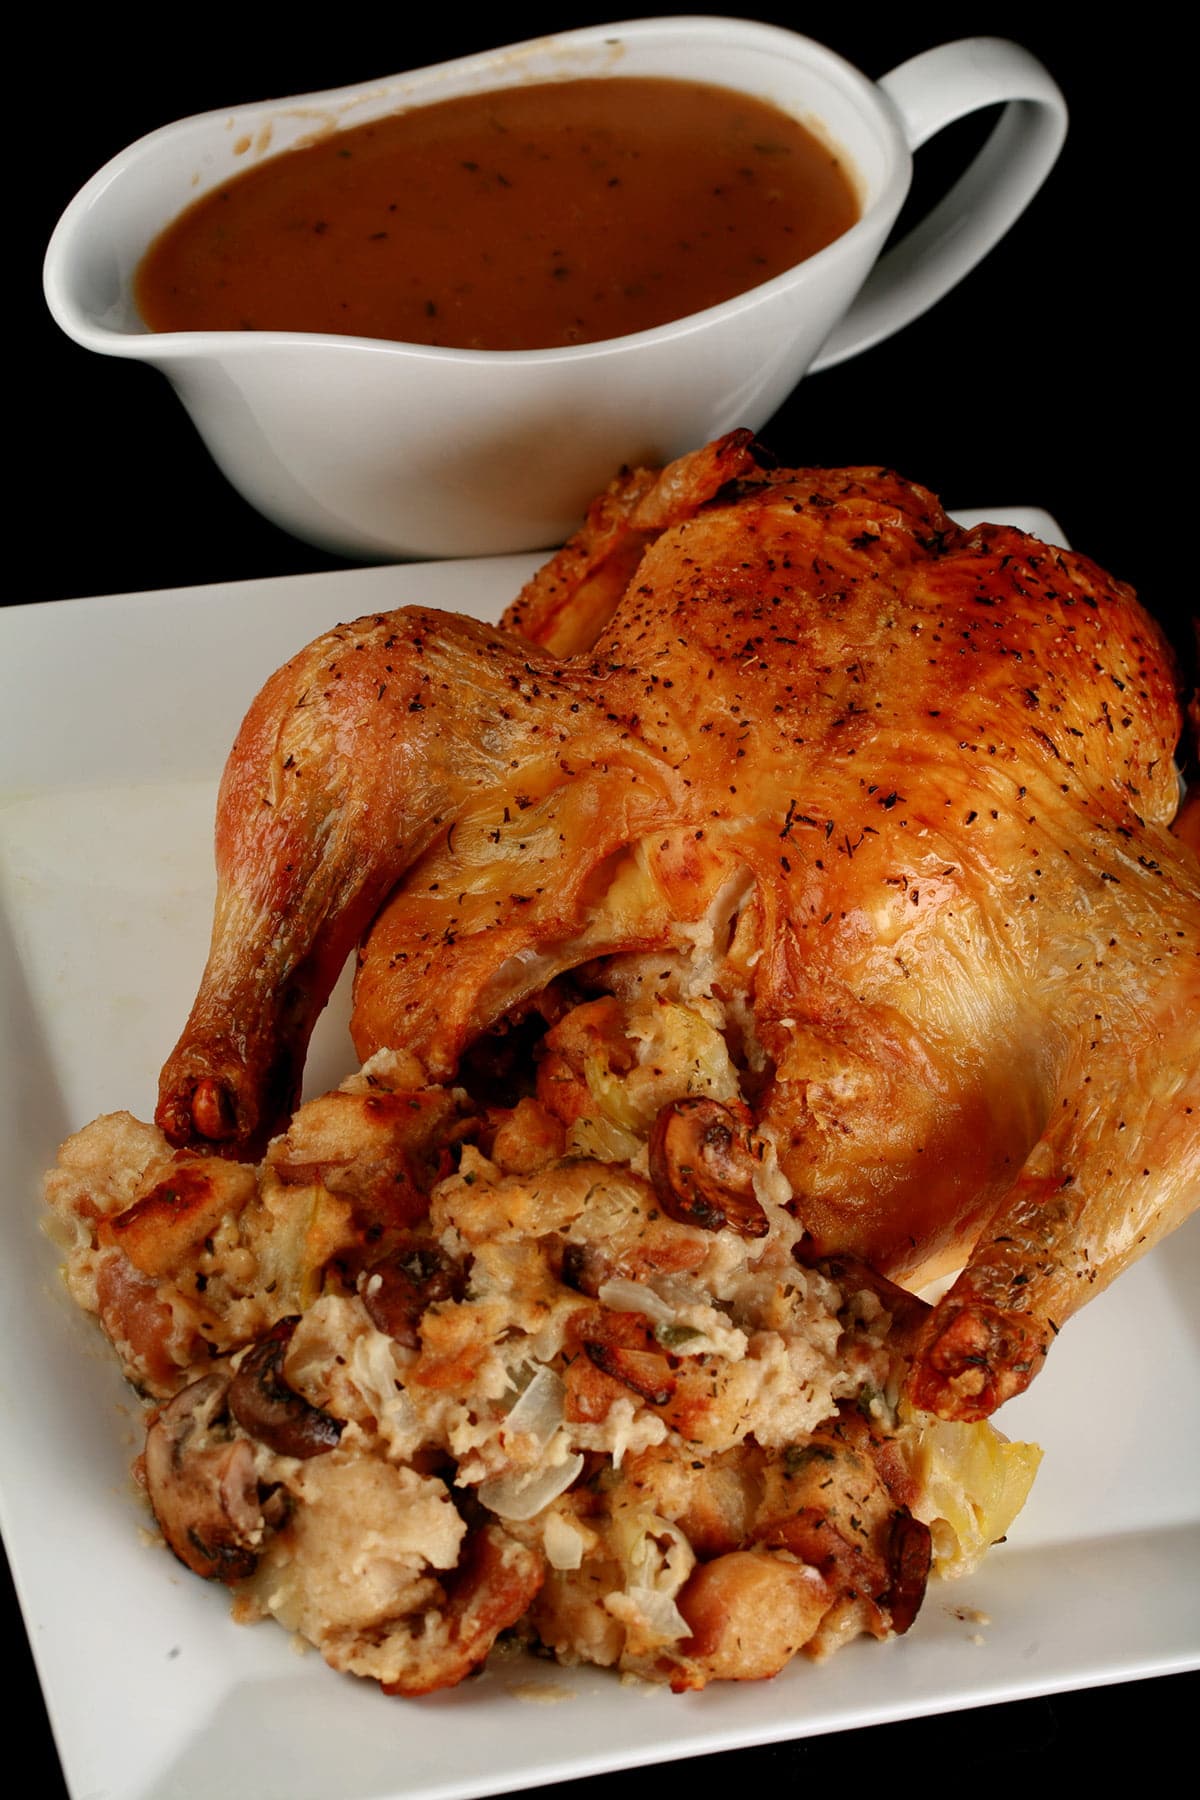 Close up image of a roasted turkey, with an abundance of stuffing visible. It is on a white plate, and there is a bowl of gravy next to it.